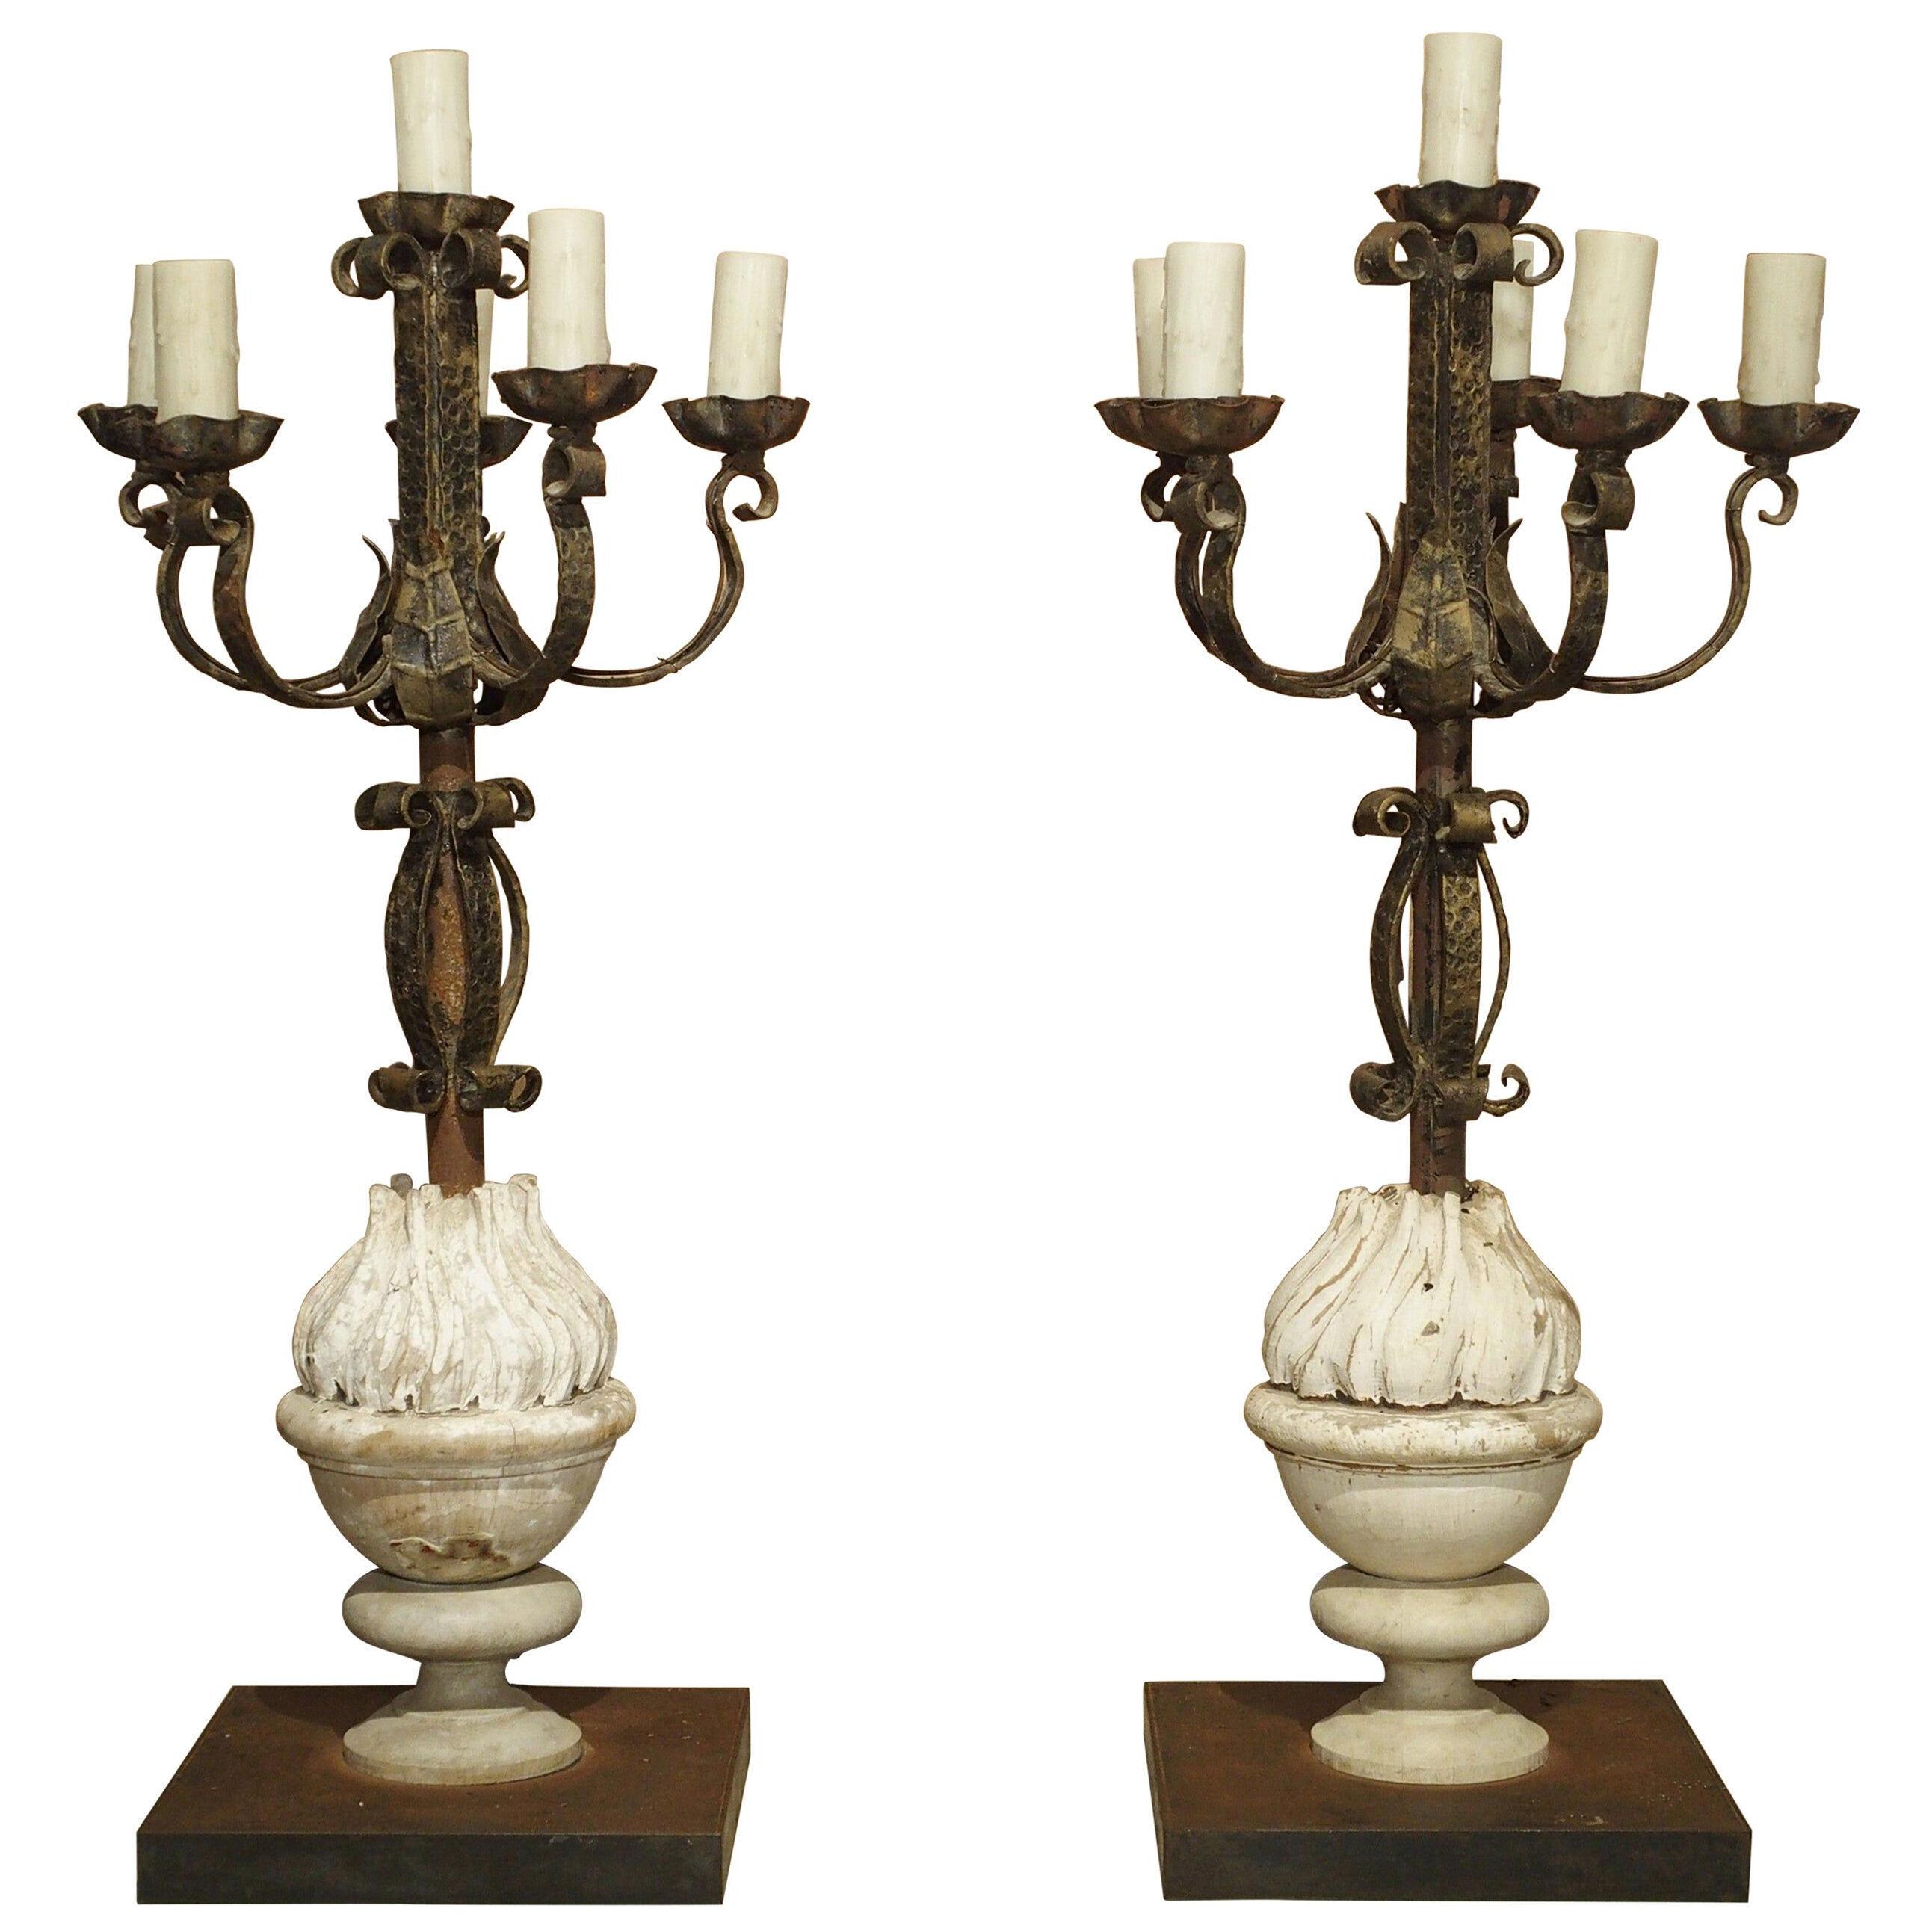 Pair of French Candelabra Lamps Made from Hand Wrought Iron and Antique Elements